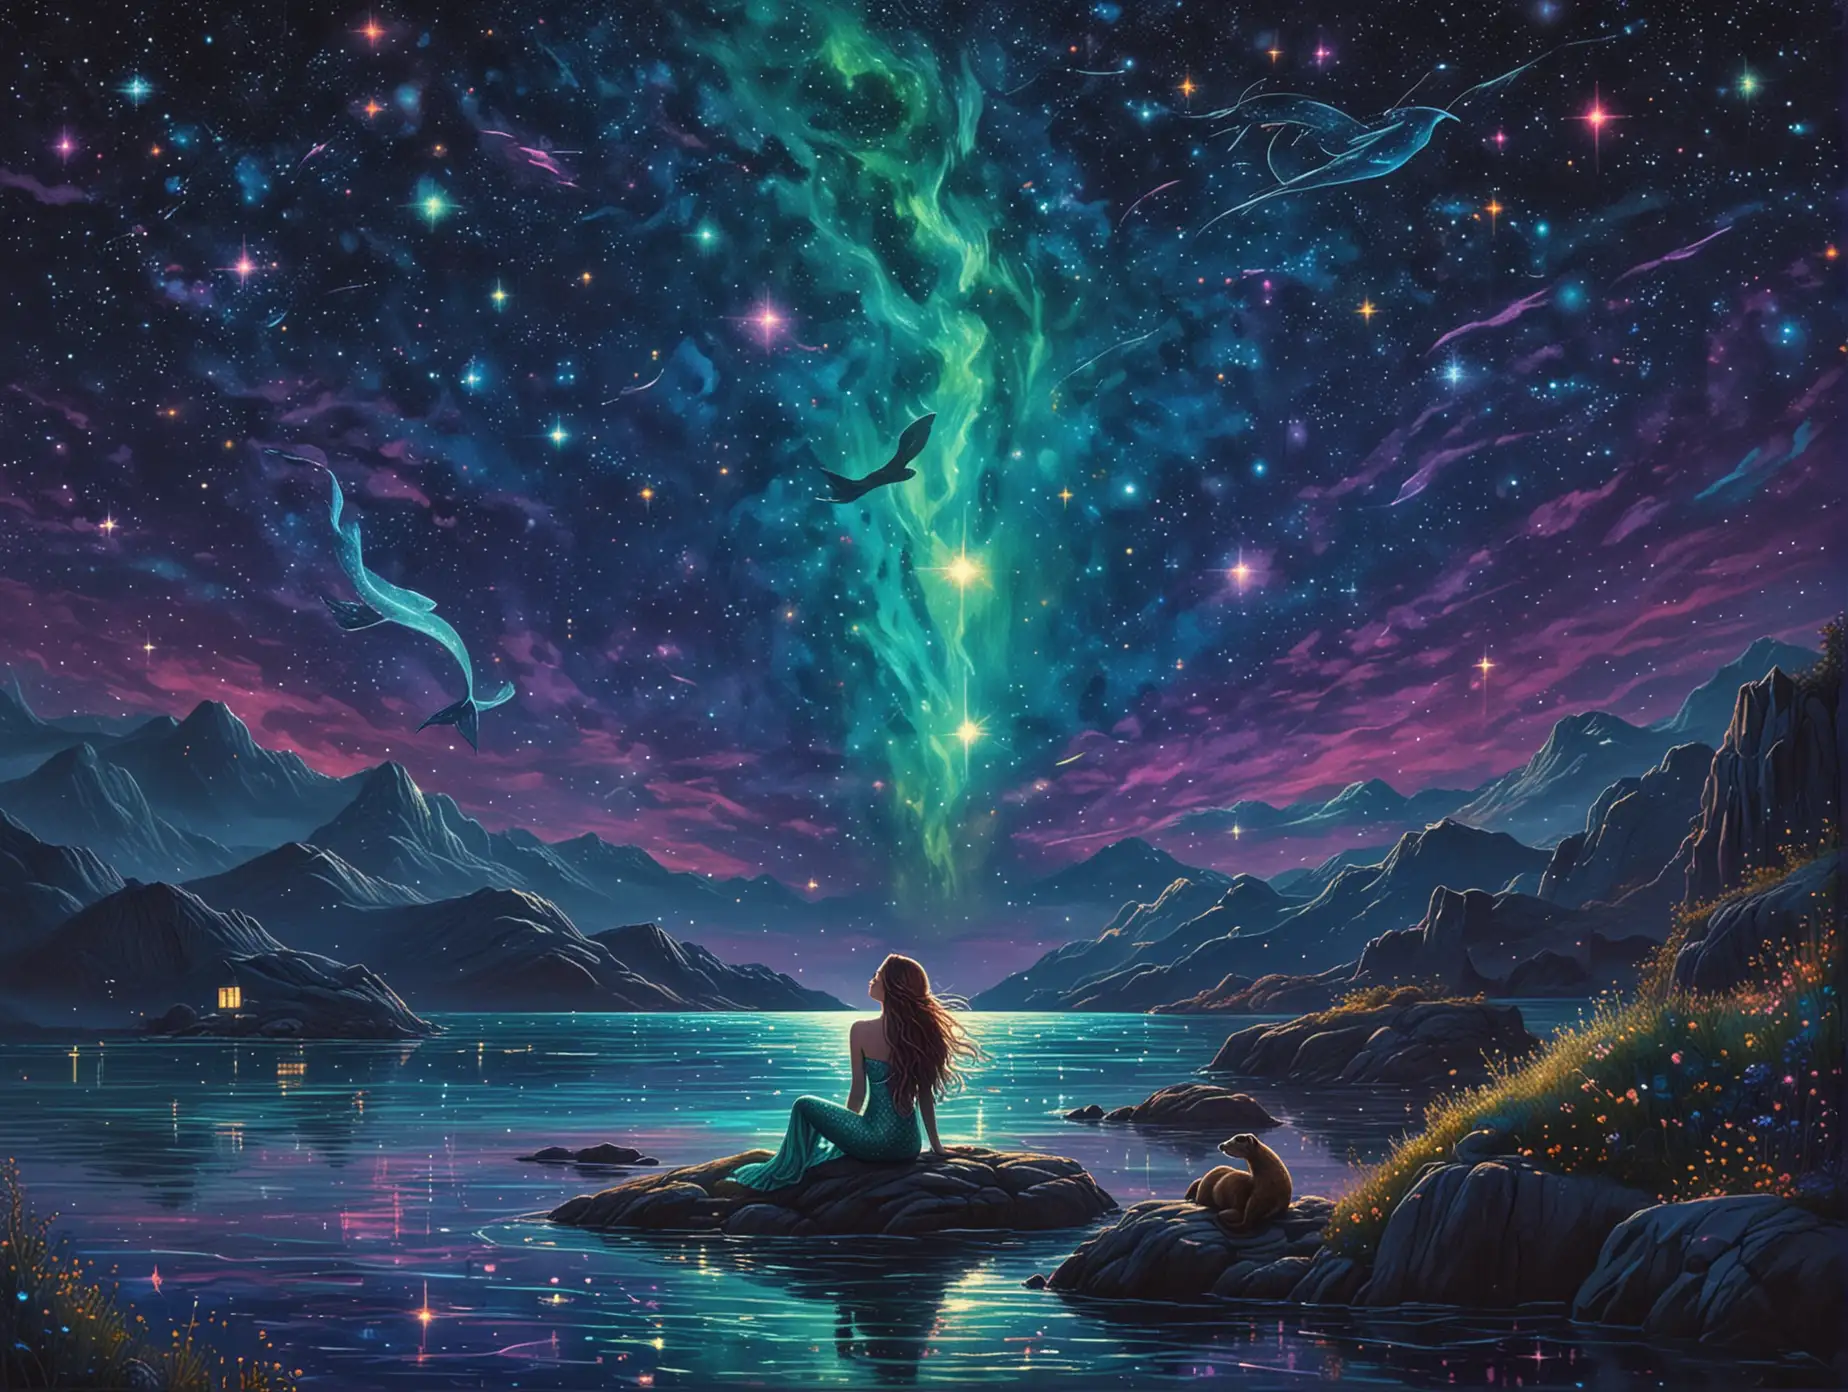 Surreal Starry Night Mermaid Gazing at Neon Constellations with Otter Companion